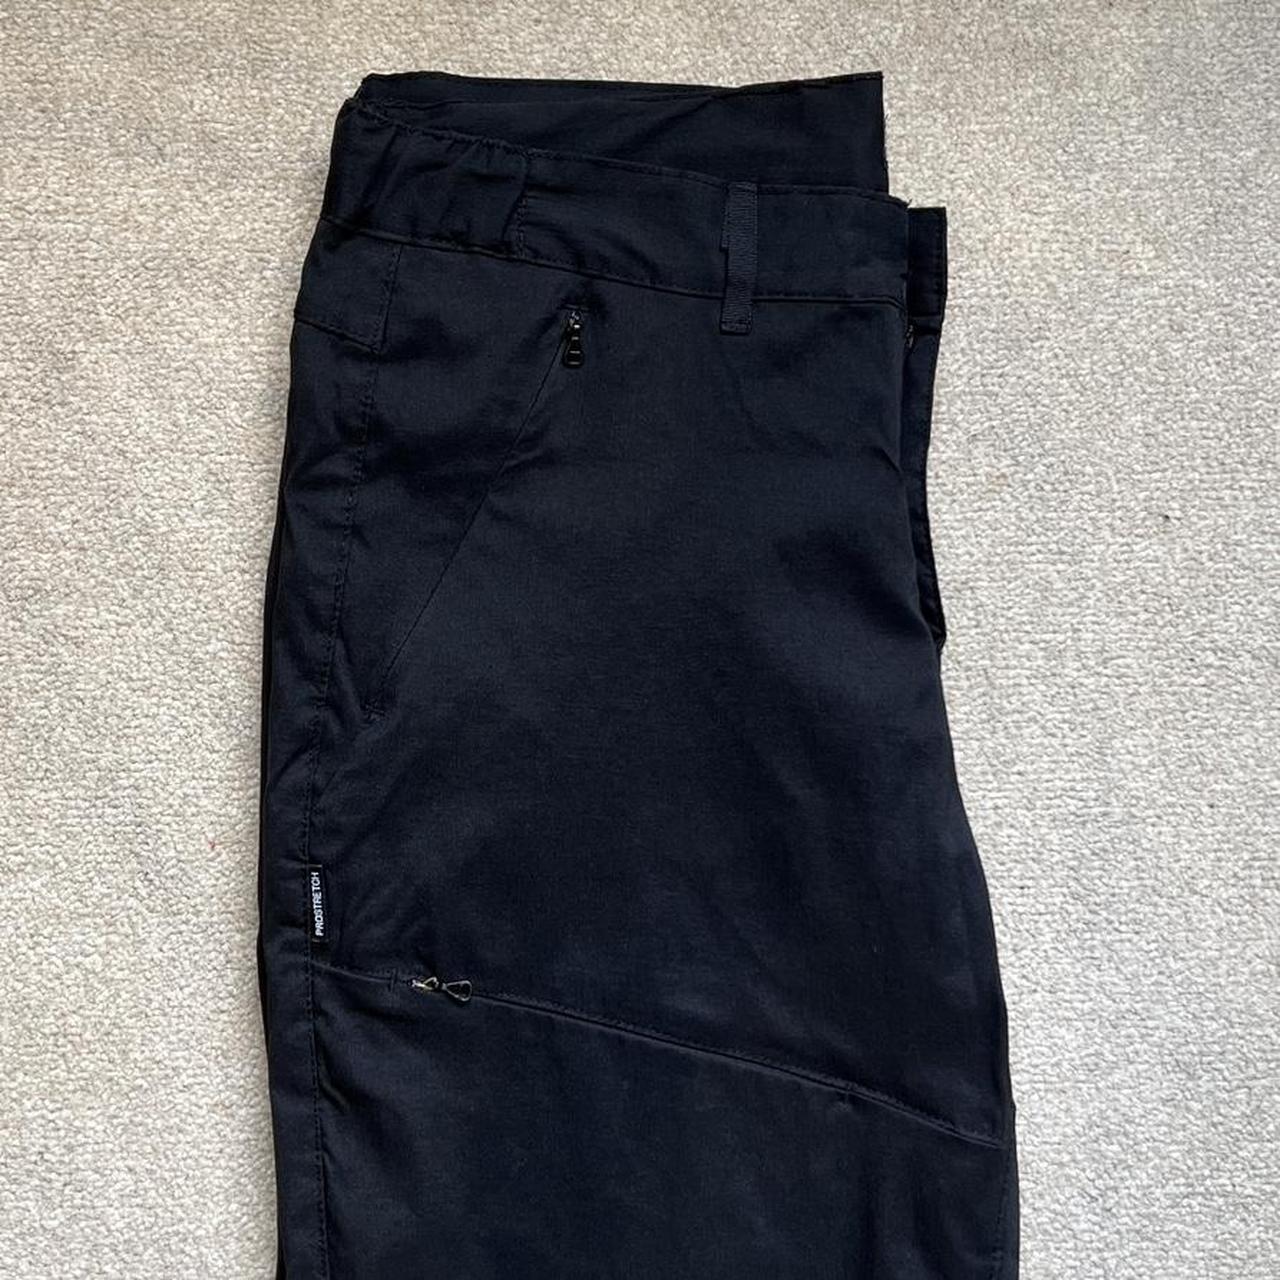 Craghoppers Black Technical Pant - No clear signs of... - Depop